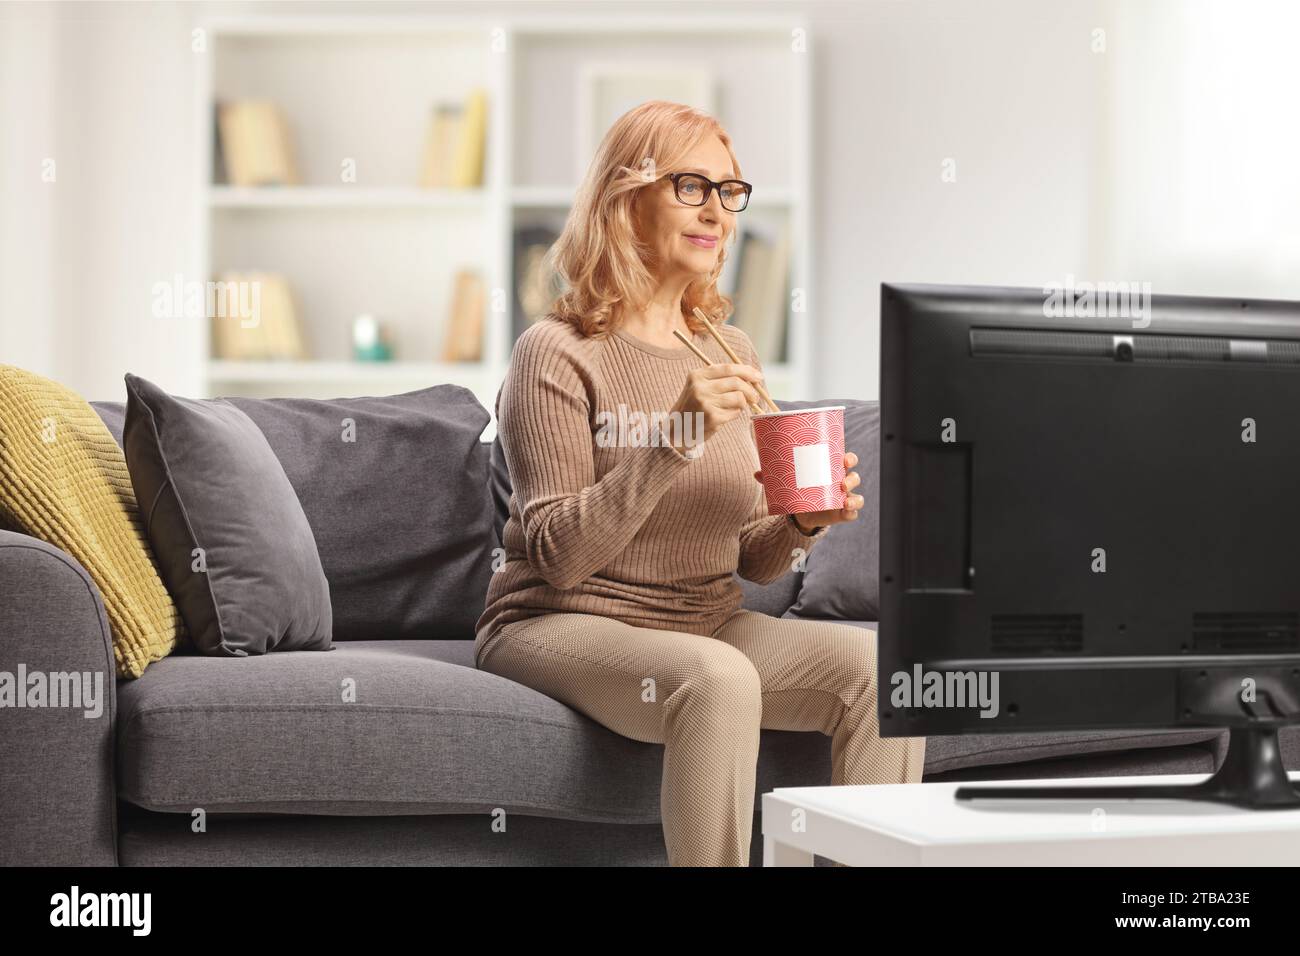 Woman sitting on a couch in front of tv and eating noodles Stock Photo